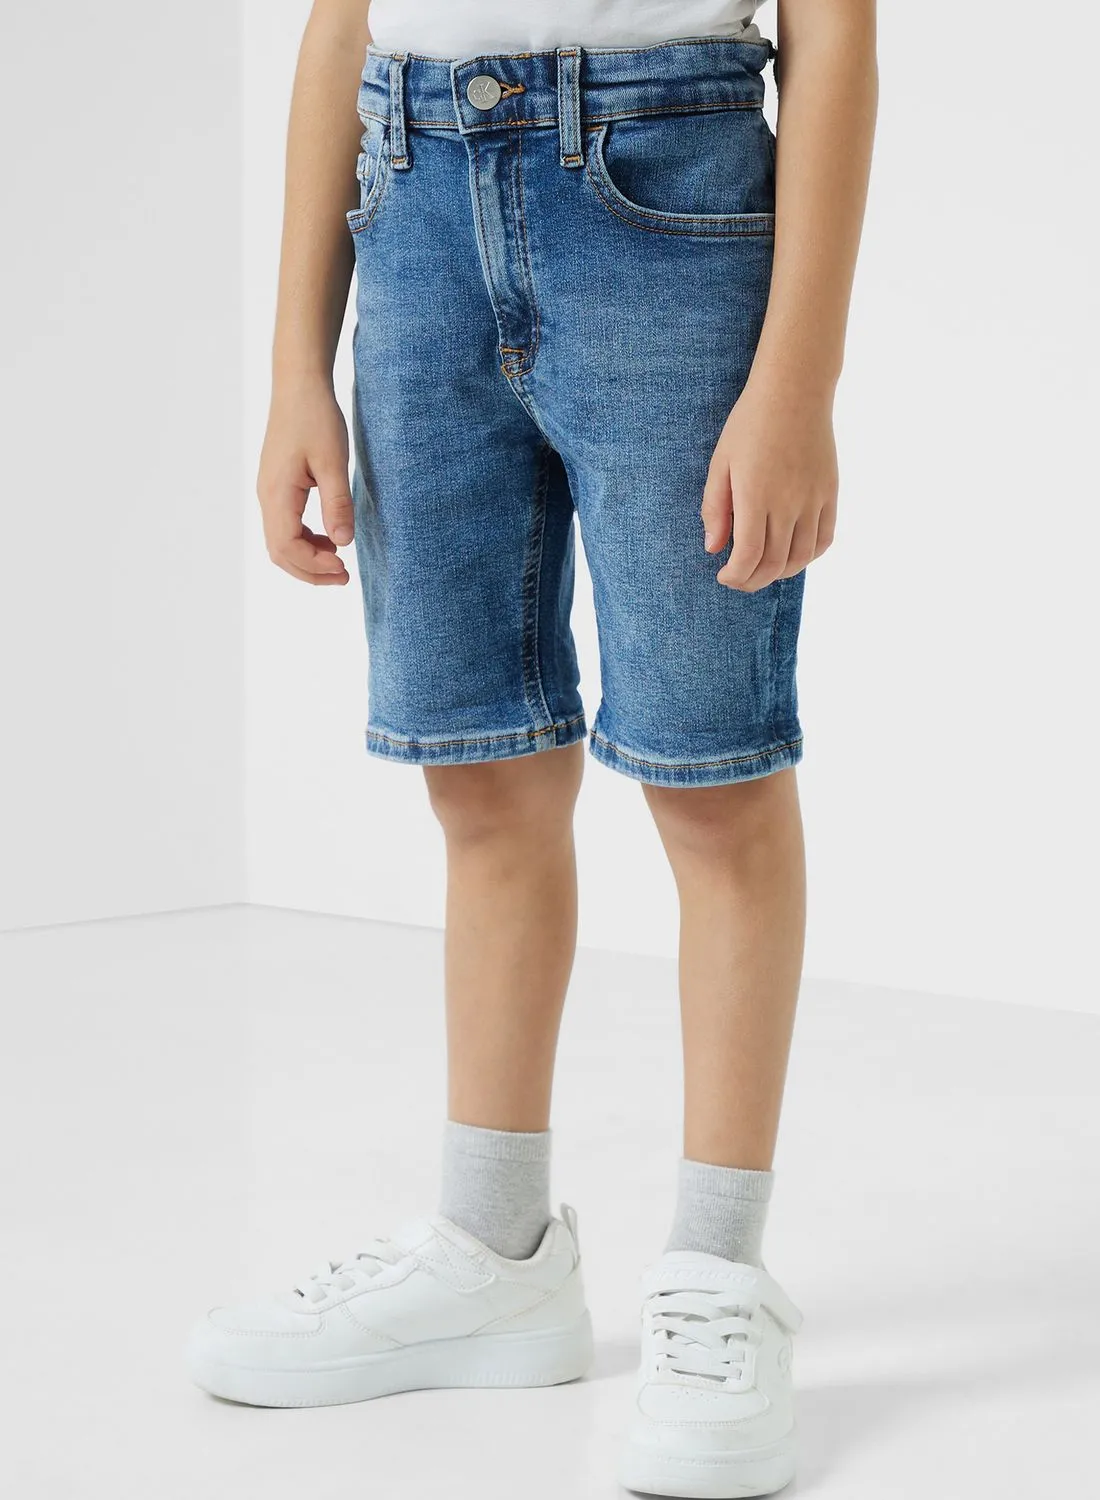 Calvin Klein Jeans Youth Relaxed Fit Denim Shorts